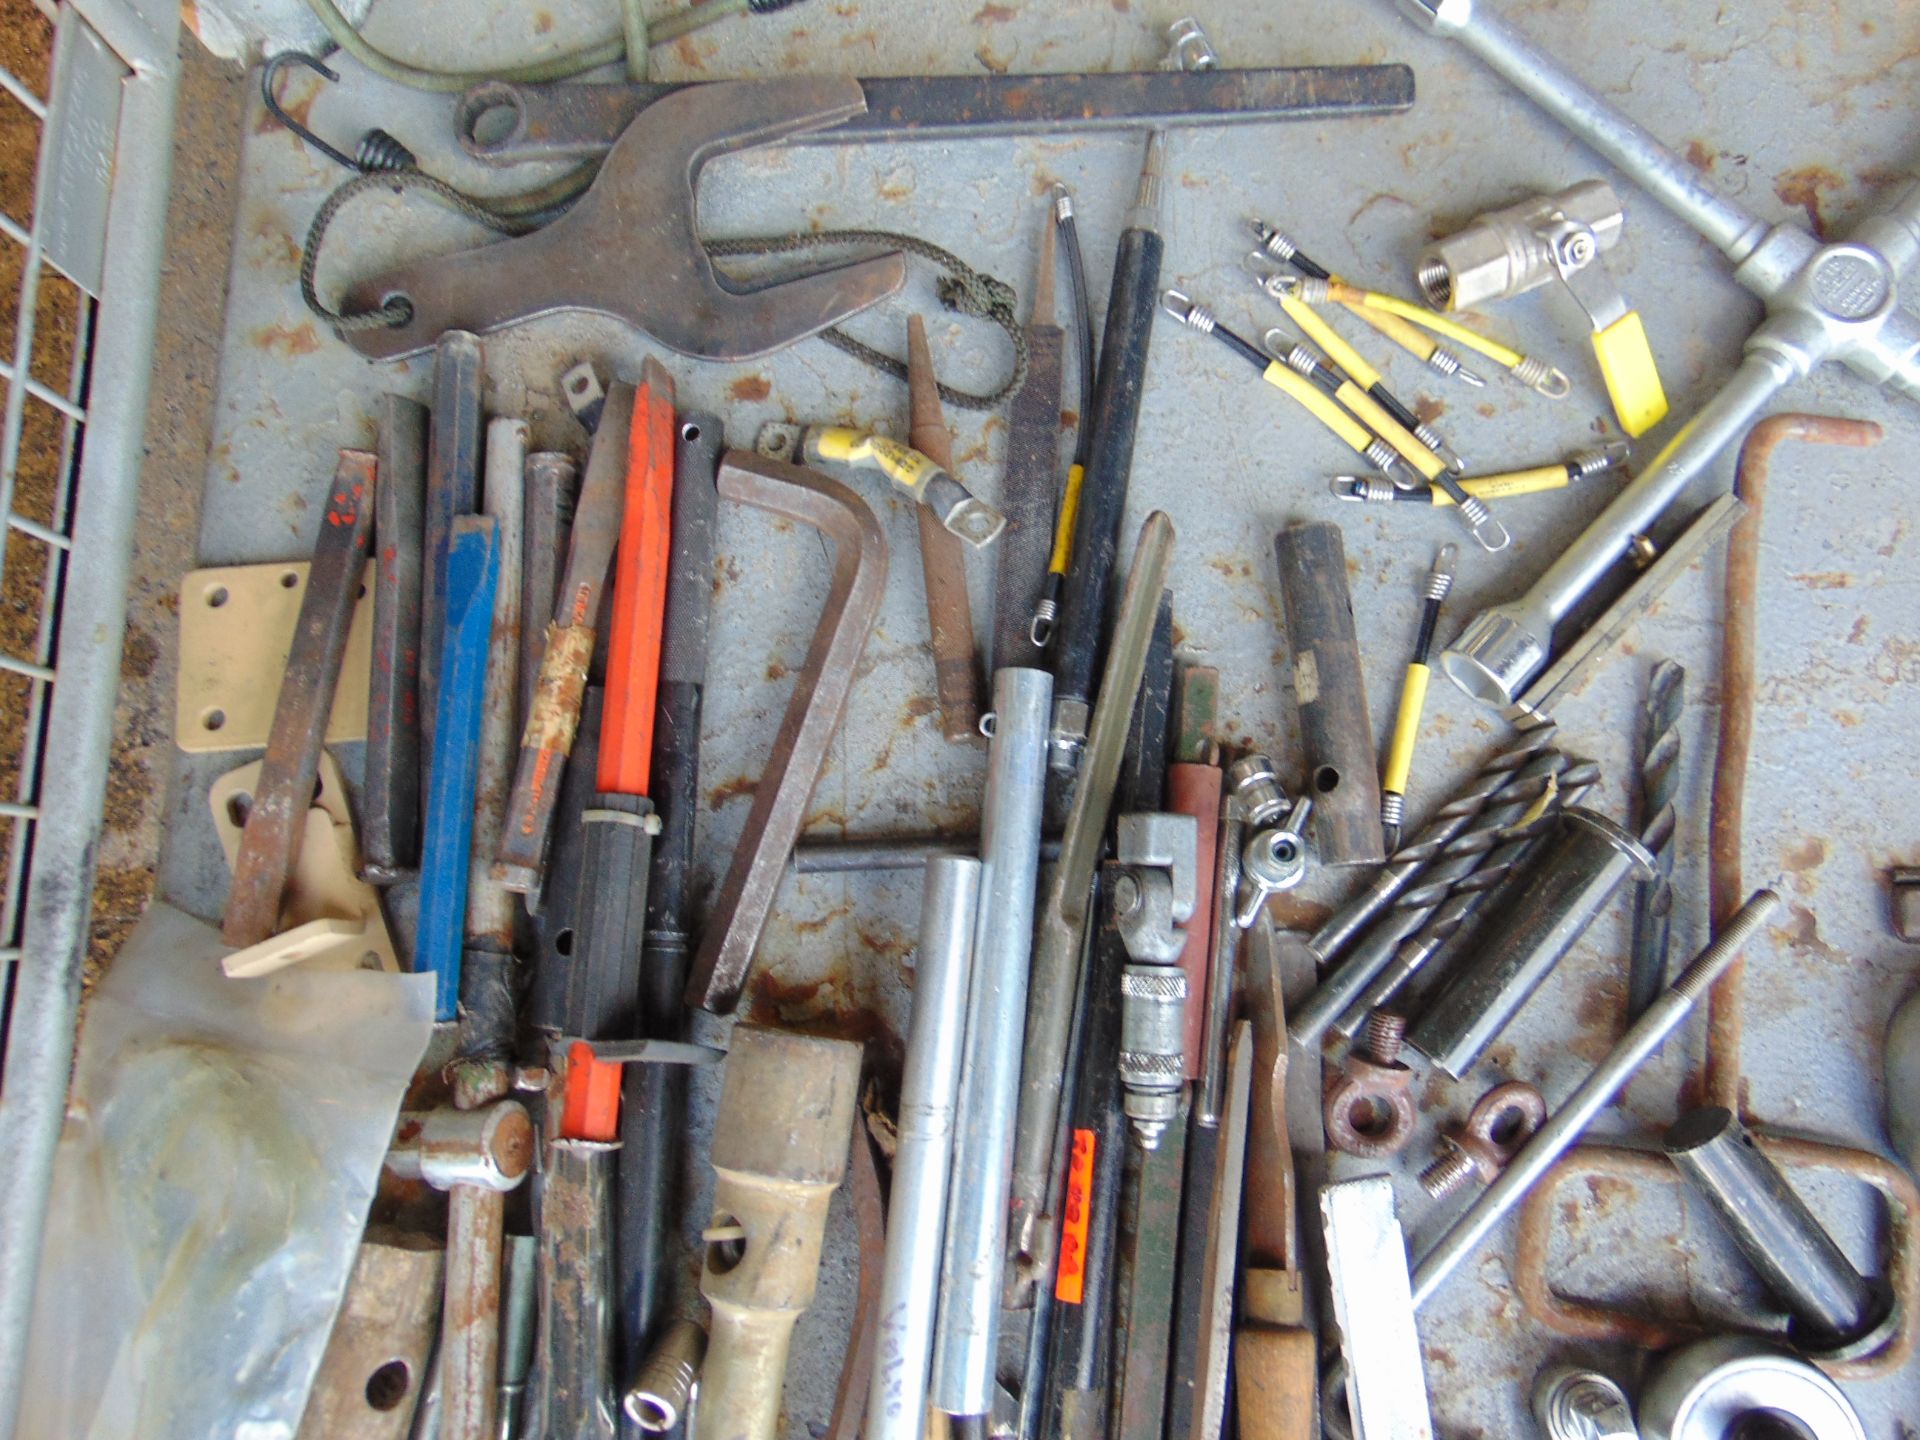 Stillage of Assorted Tools - Chisels, Files, Torque Wrench etc. - Image 5 of 6